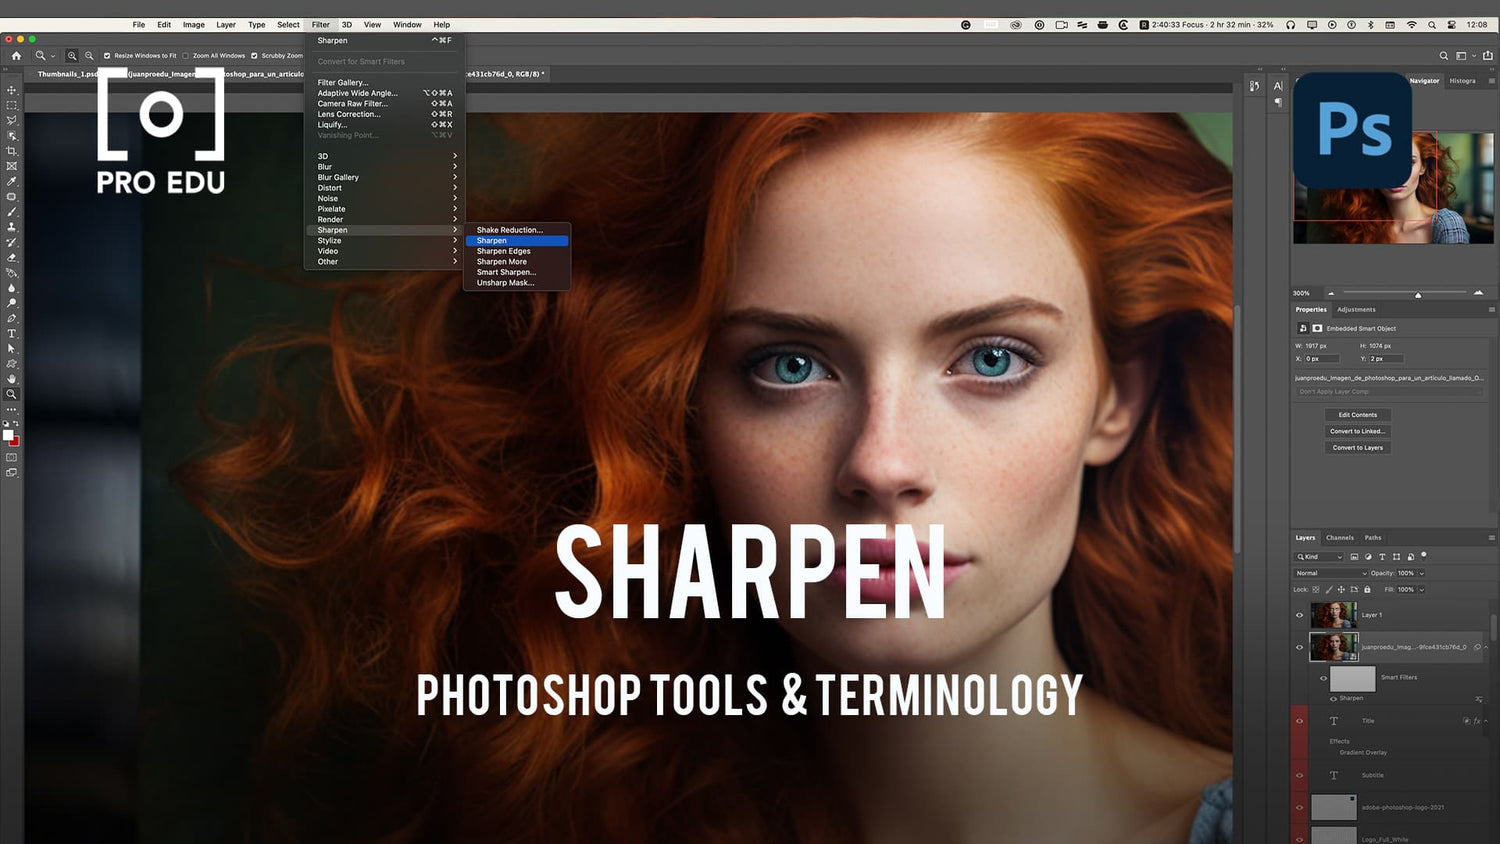 Sharpening Images in Photoshop: Enhanced Clarity